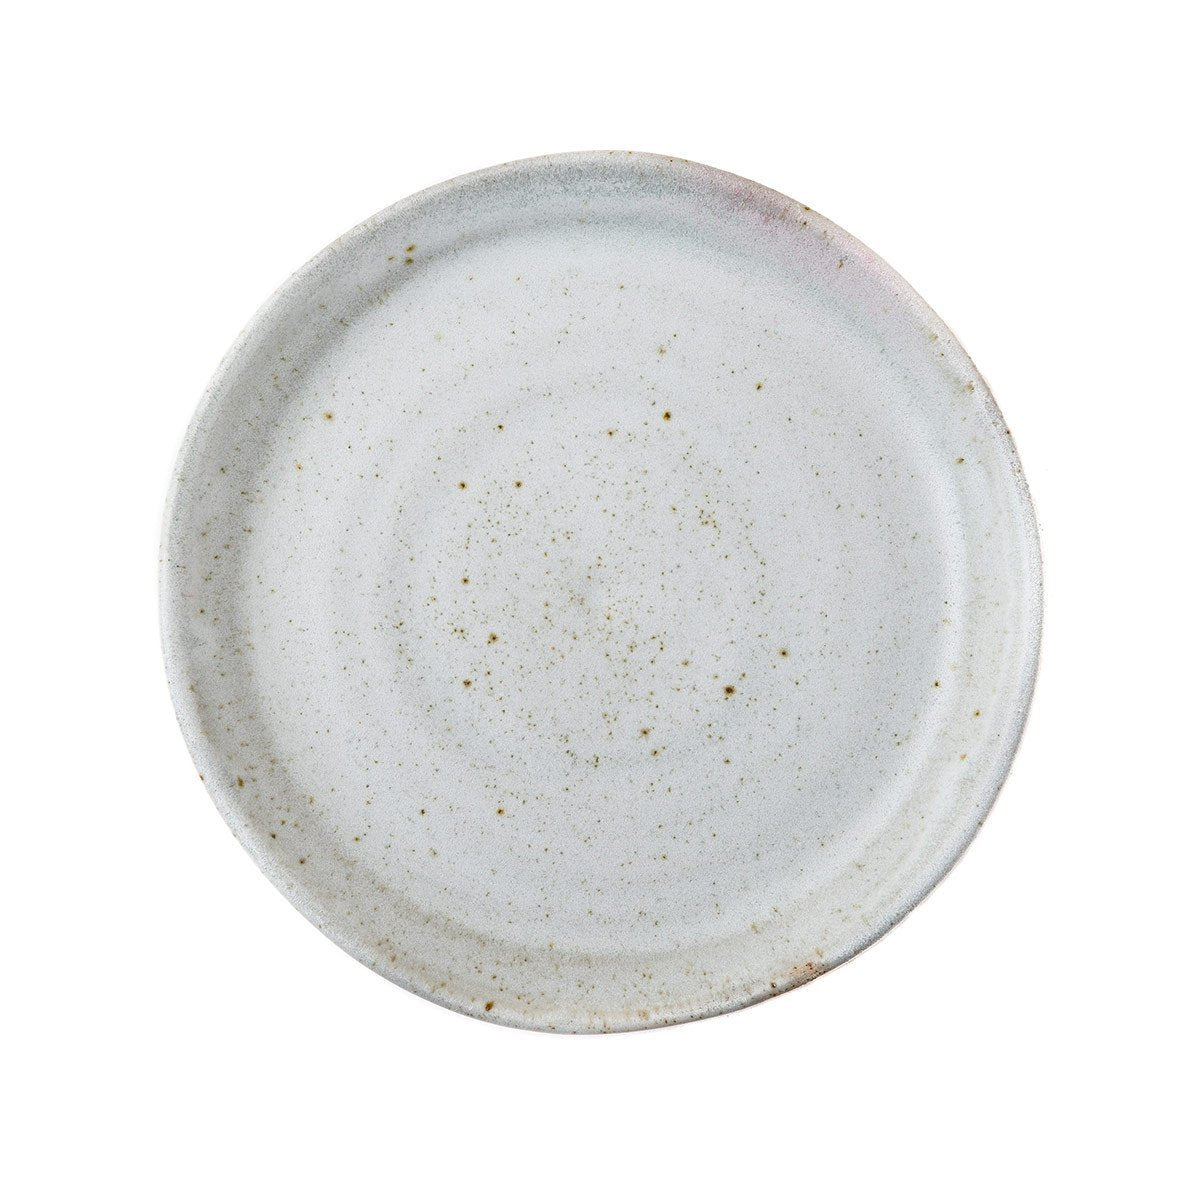 Beguiling Wild Ceramic Plate